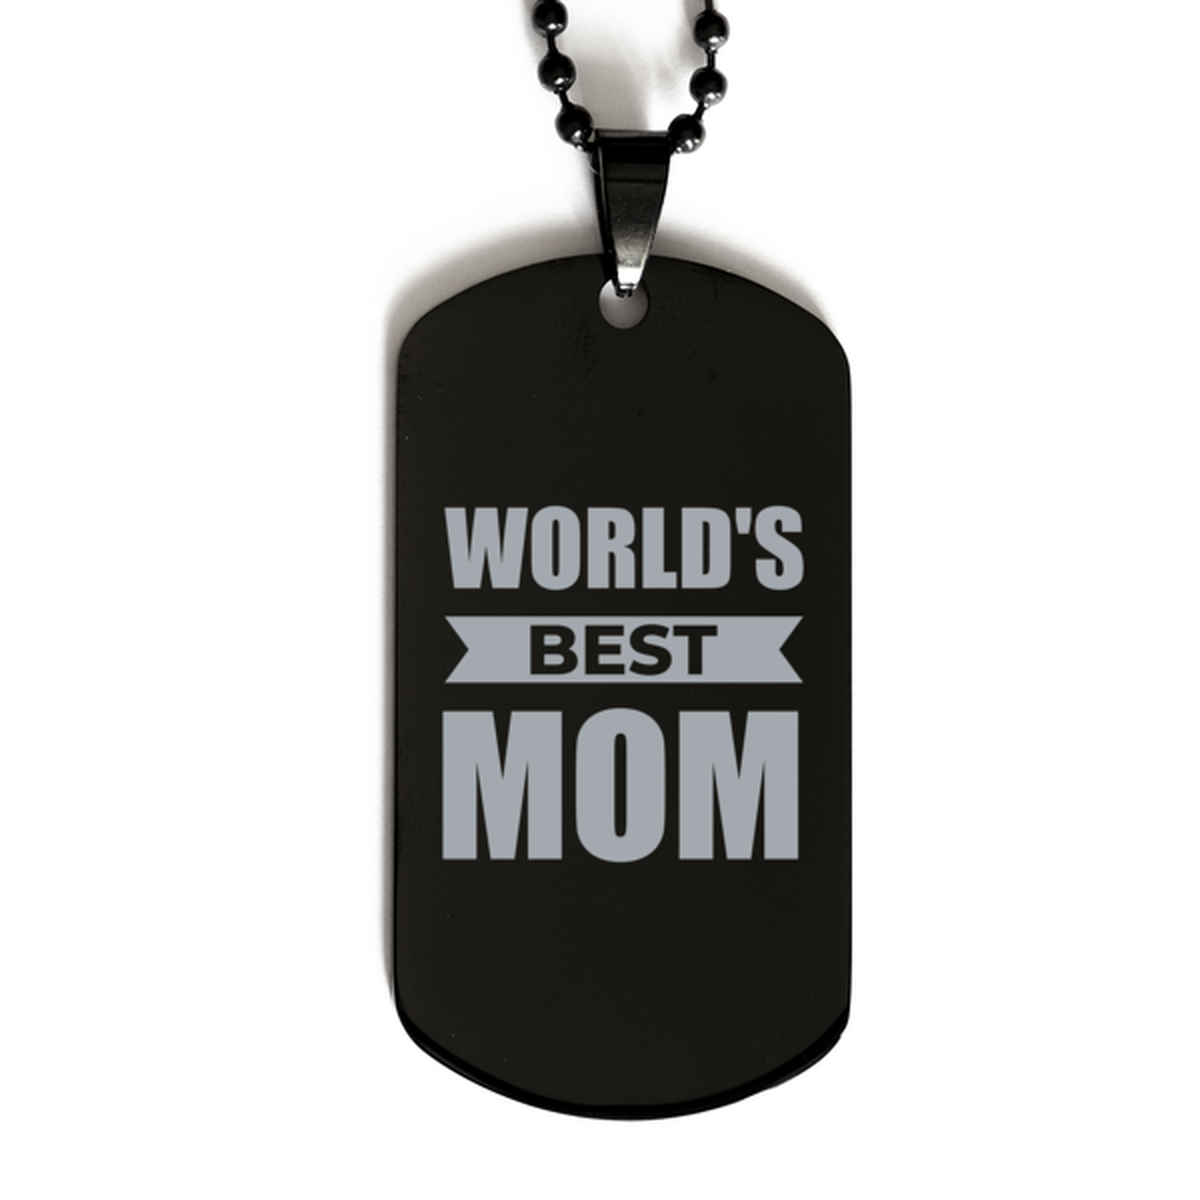 Worlds Best Mom Gifts, Funny Black Engraved Dog Tag For Mom, Birthday Presents For Women